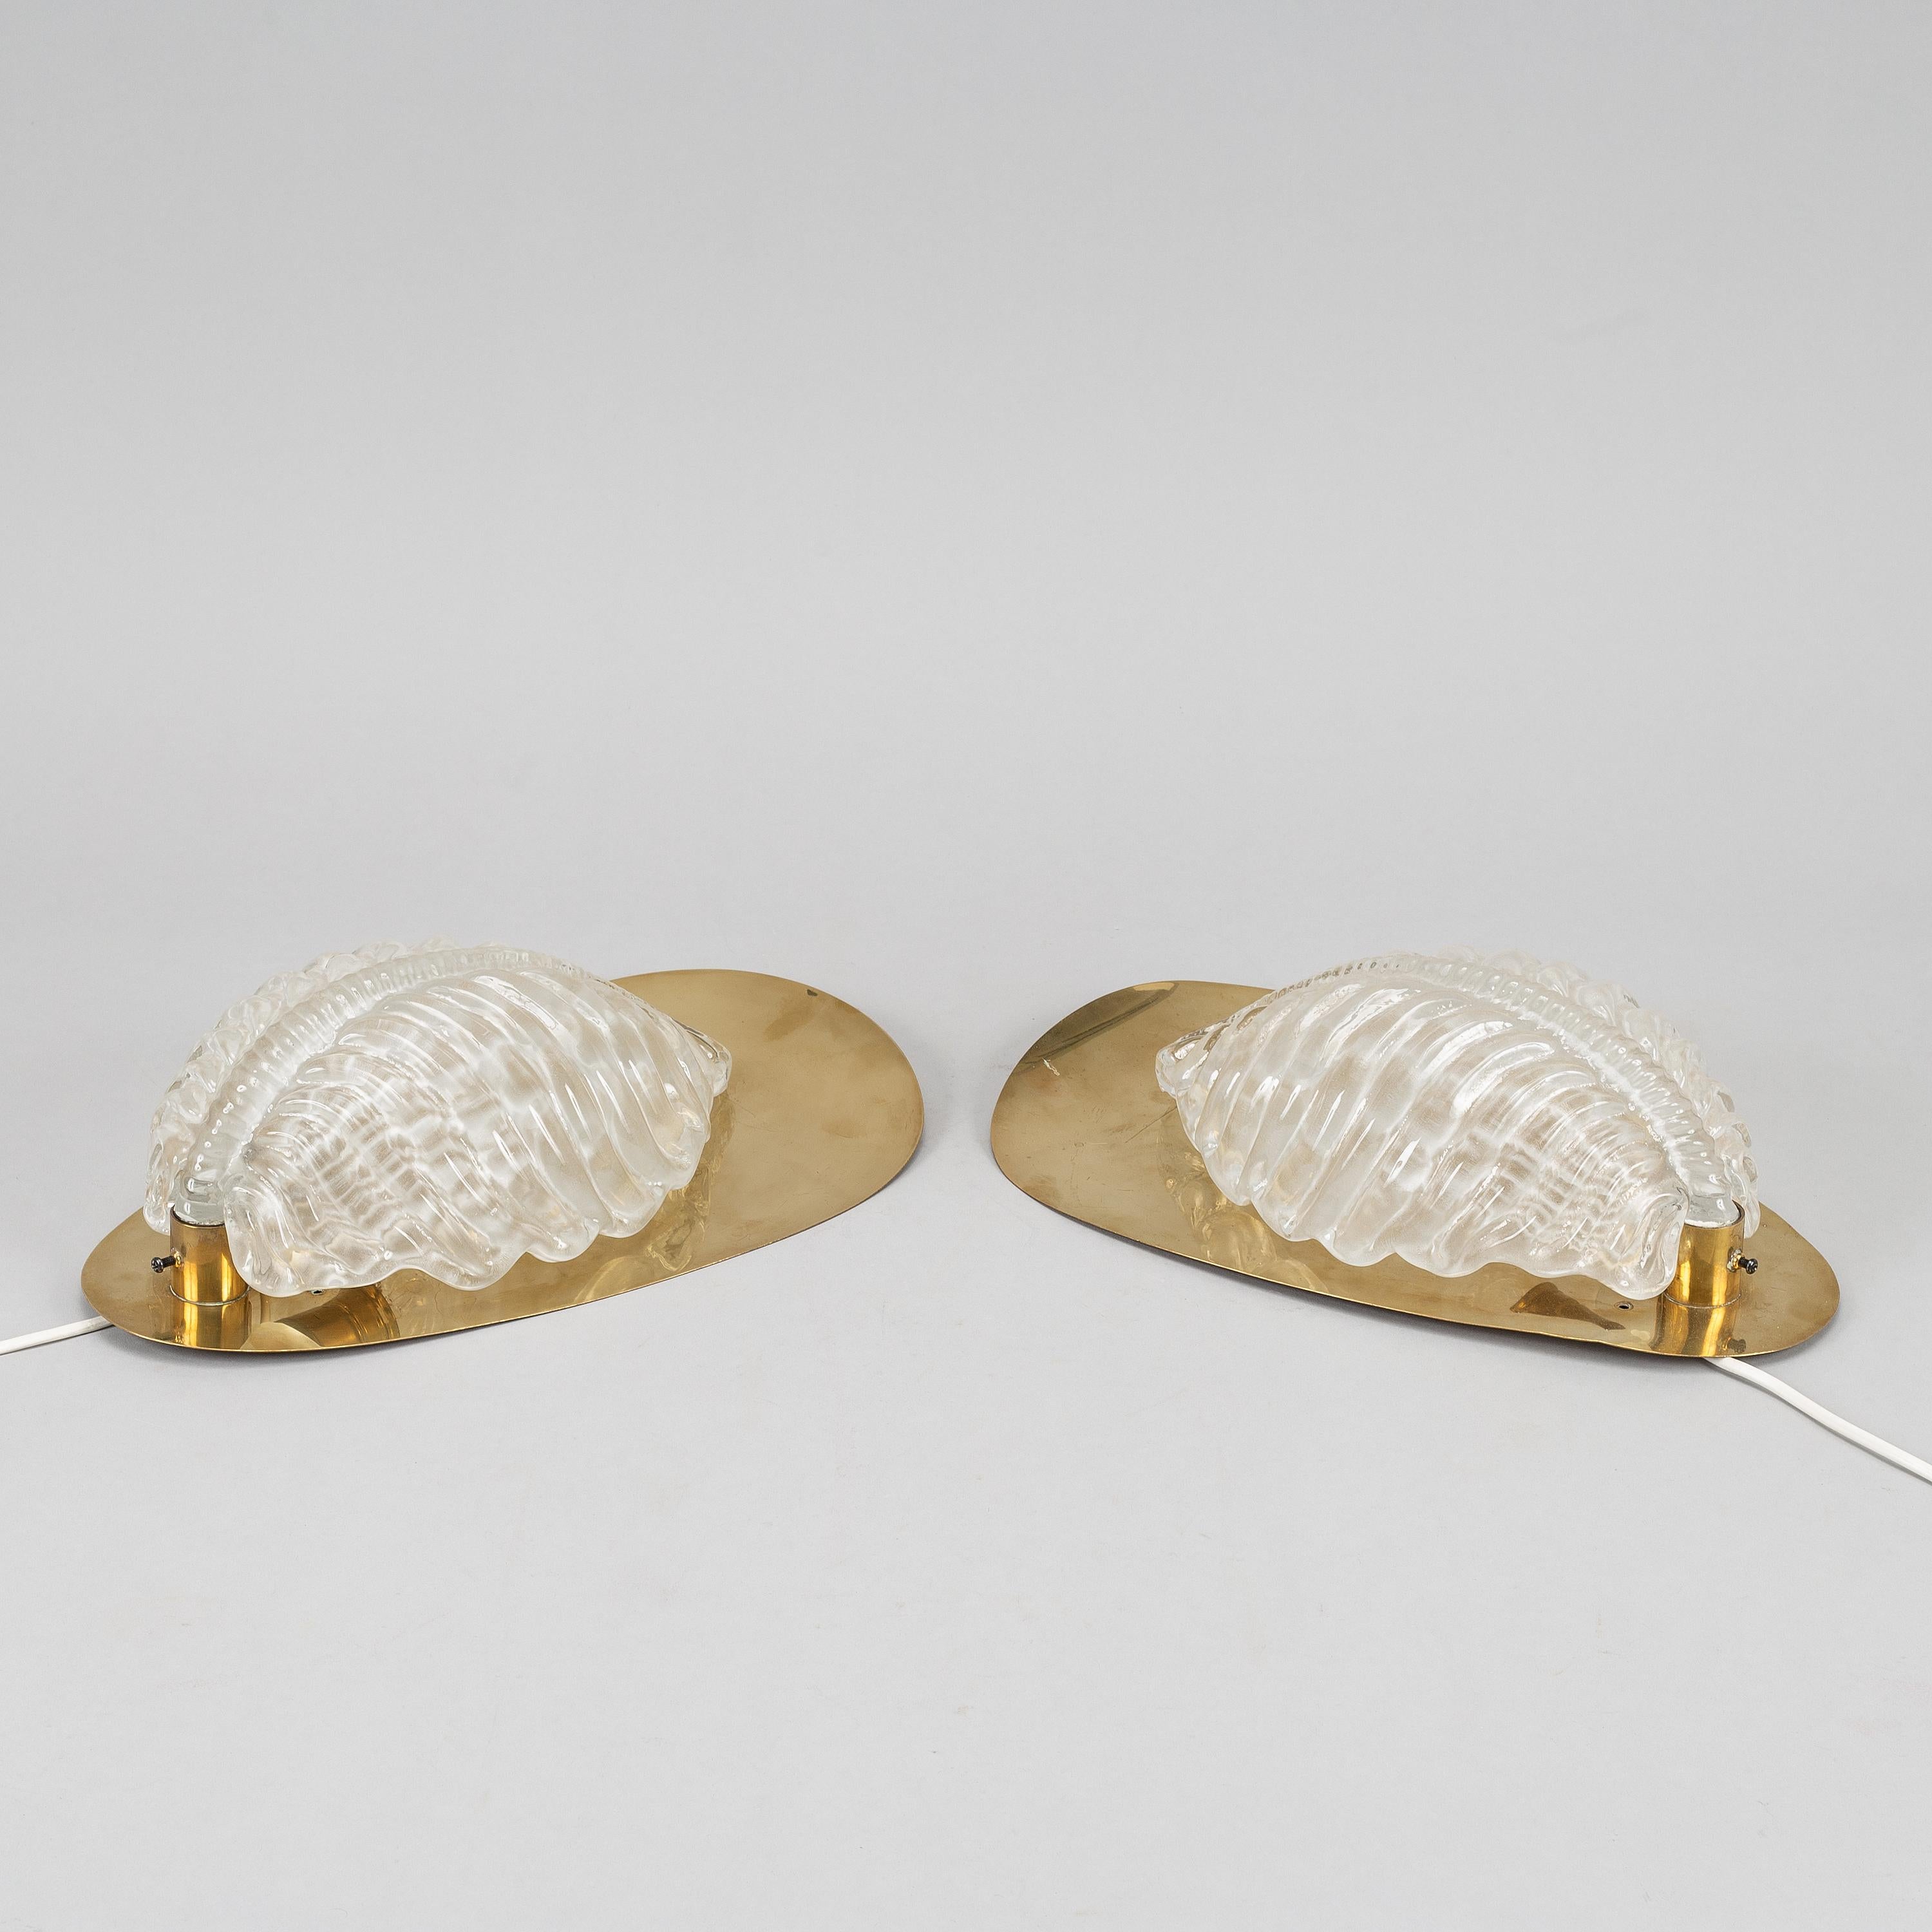 Fritz kurz sconces leaf shaped brass and glass Orrefors 1960s For Sale 3